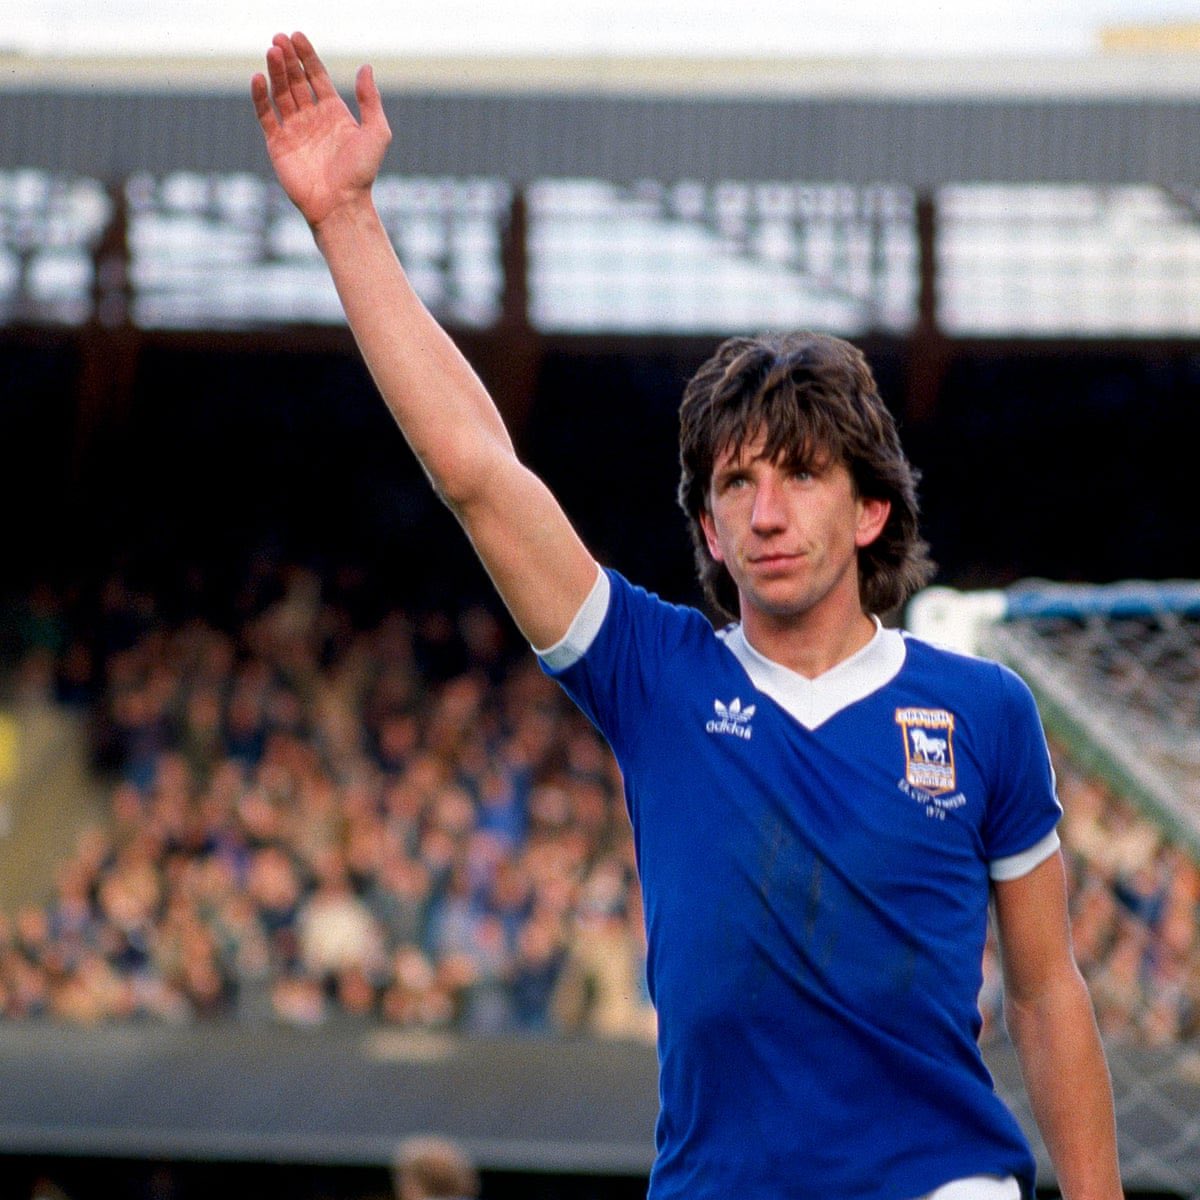 Congrats to @IpswichTown on promotion to the @premierleague. I’m imagining the smile on Paul Mariner’s face if he were still with us today.